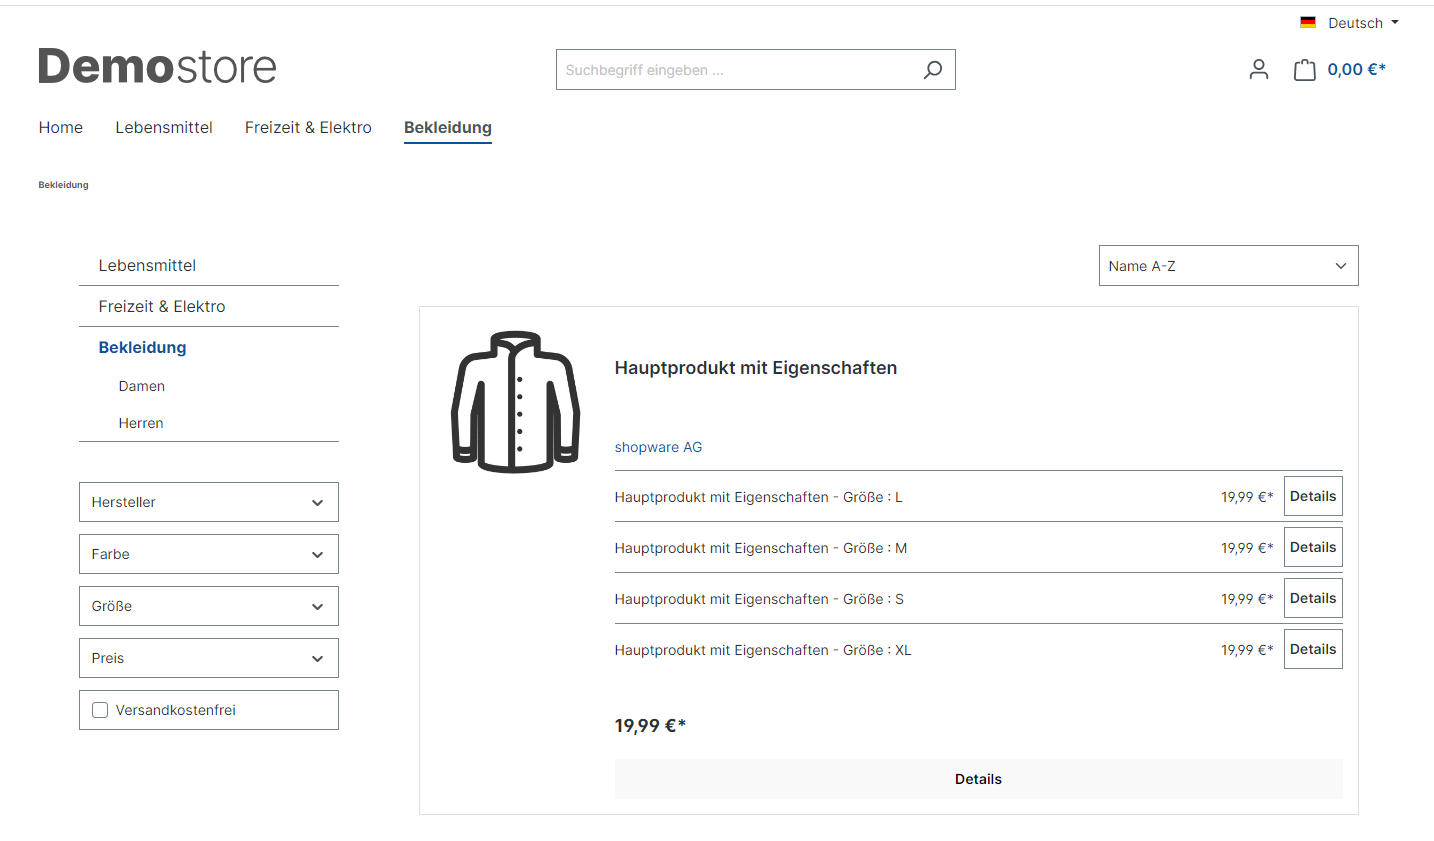 Productlist / Listing view advanced with variants for shopping experiences or listing